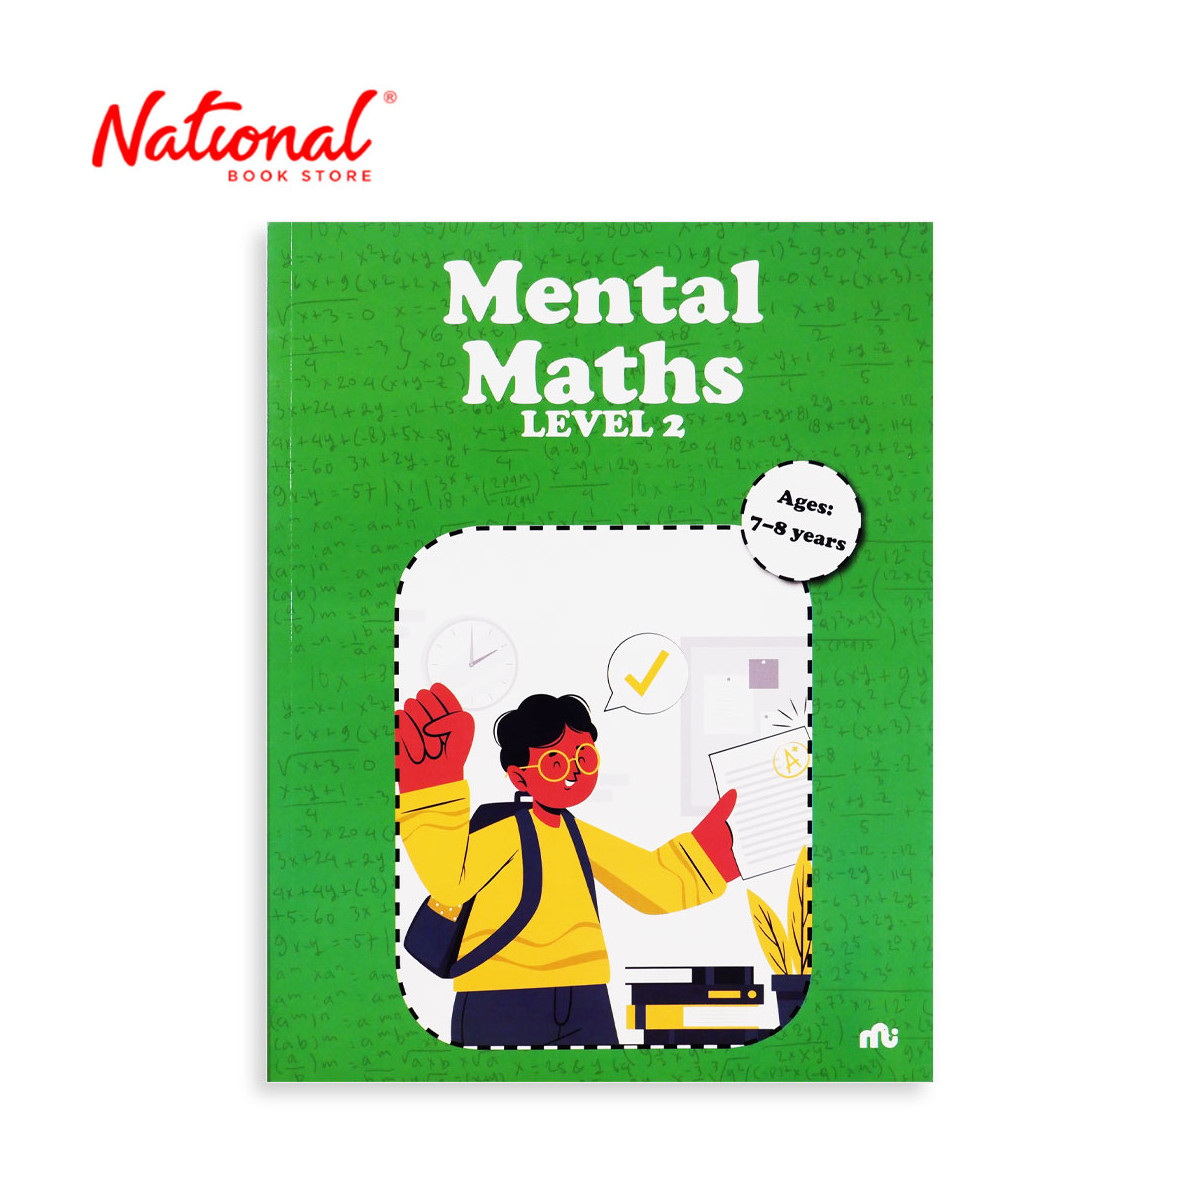 Mental Maths Level 3 - Trade Paperback - Activity Book for Kids